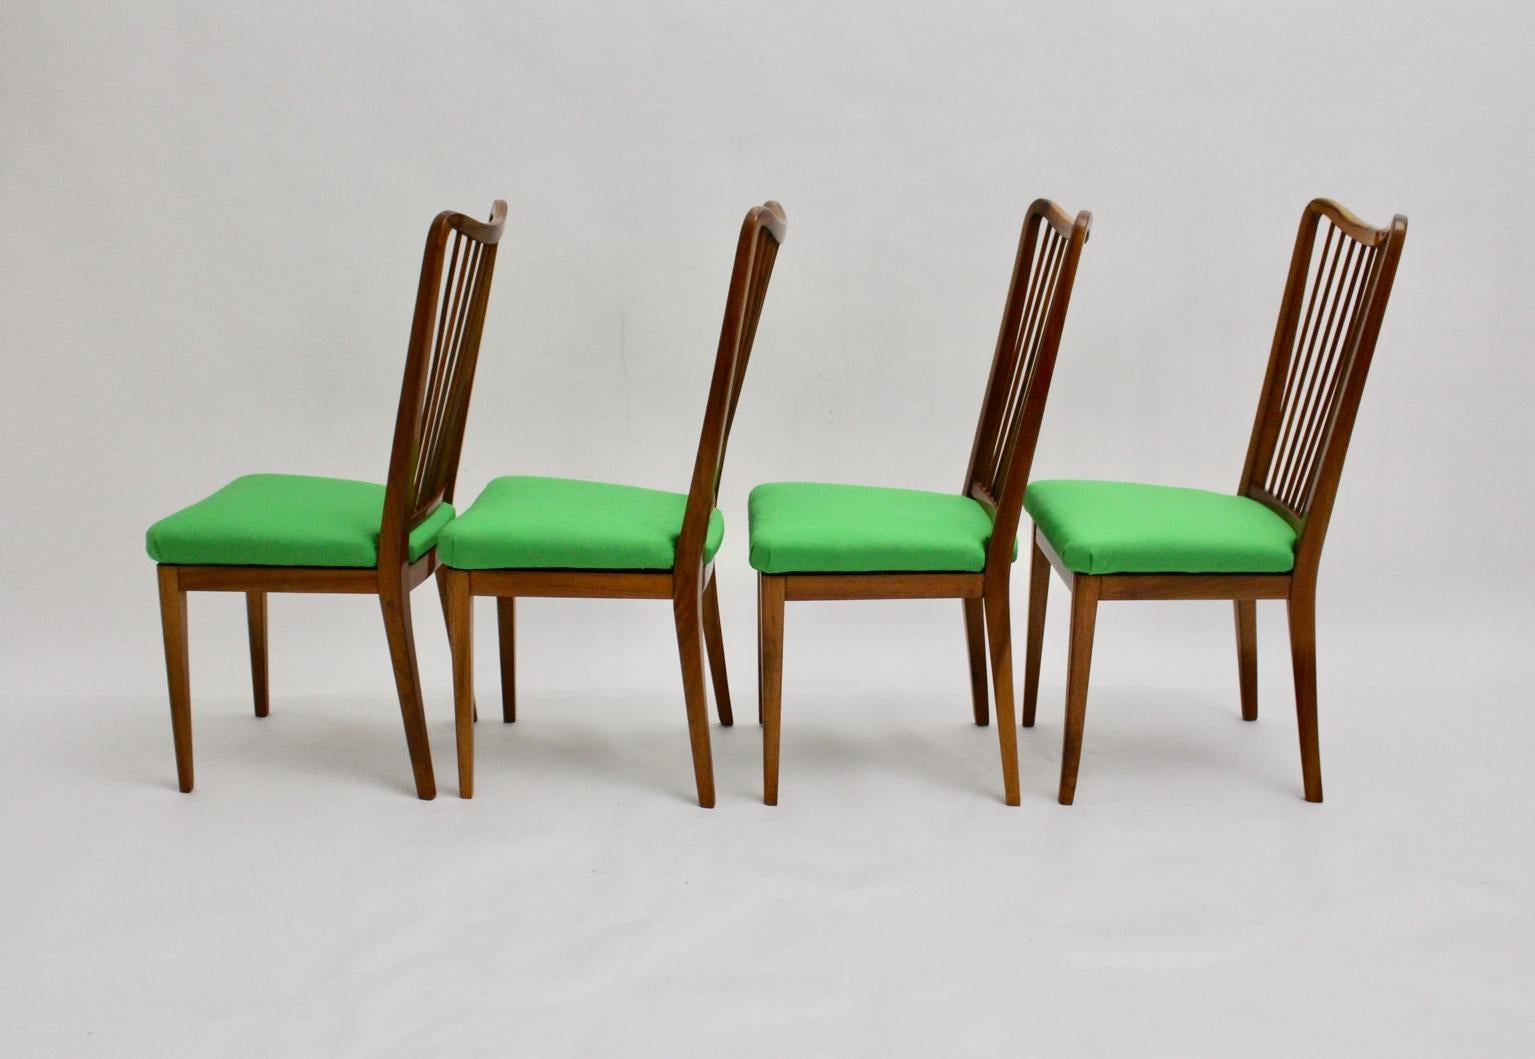 Mid Century Modern vintage dining chairs from solid walnut attributed to Oswald Haerdtl, 1950s Vienna.
Oswald Haerdtl, (1899-1959) famed Viennese architect and designer
designed coffeehouses, interiors and industrial buildings.
Membership since 1928